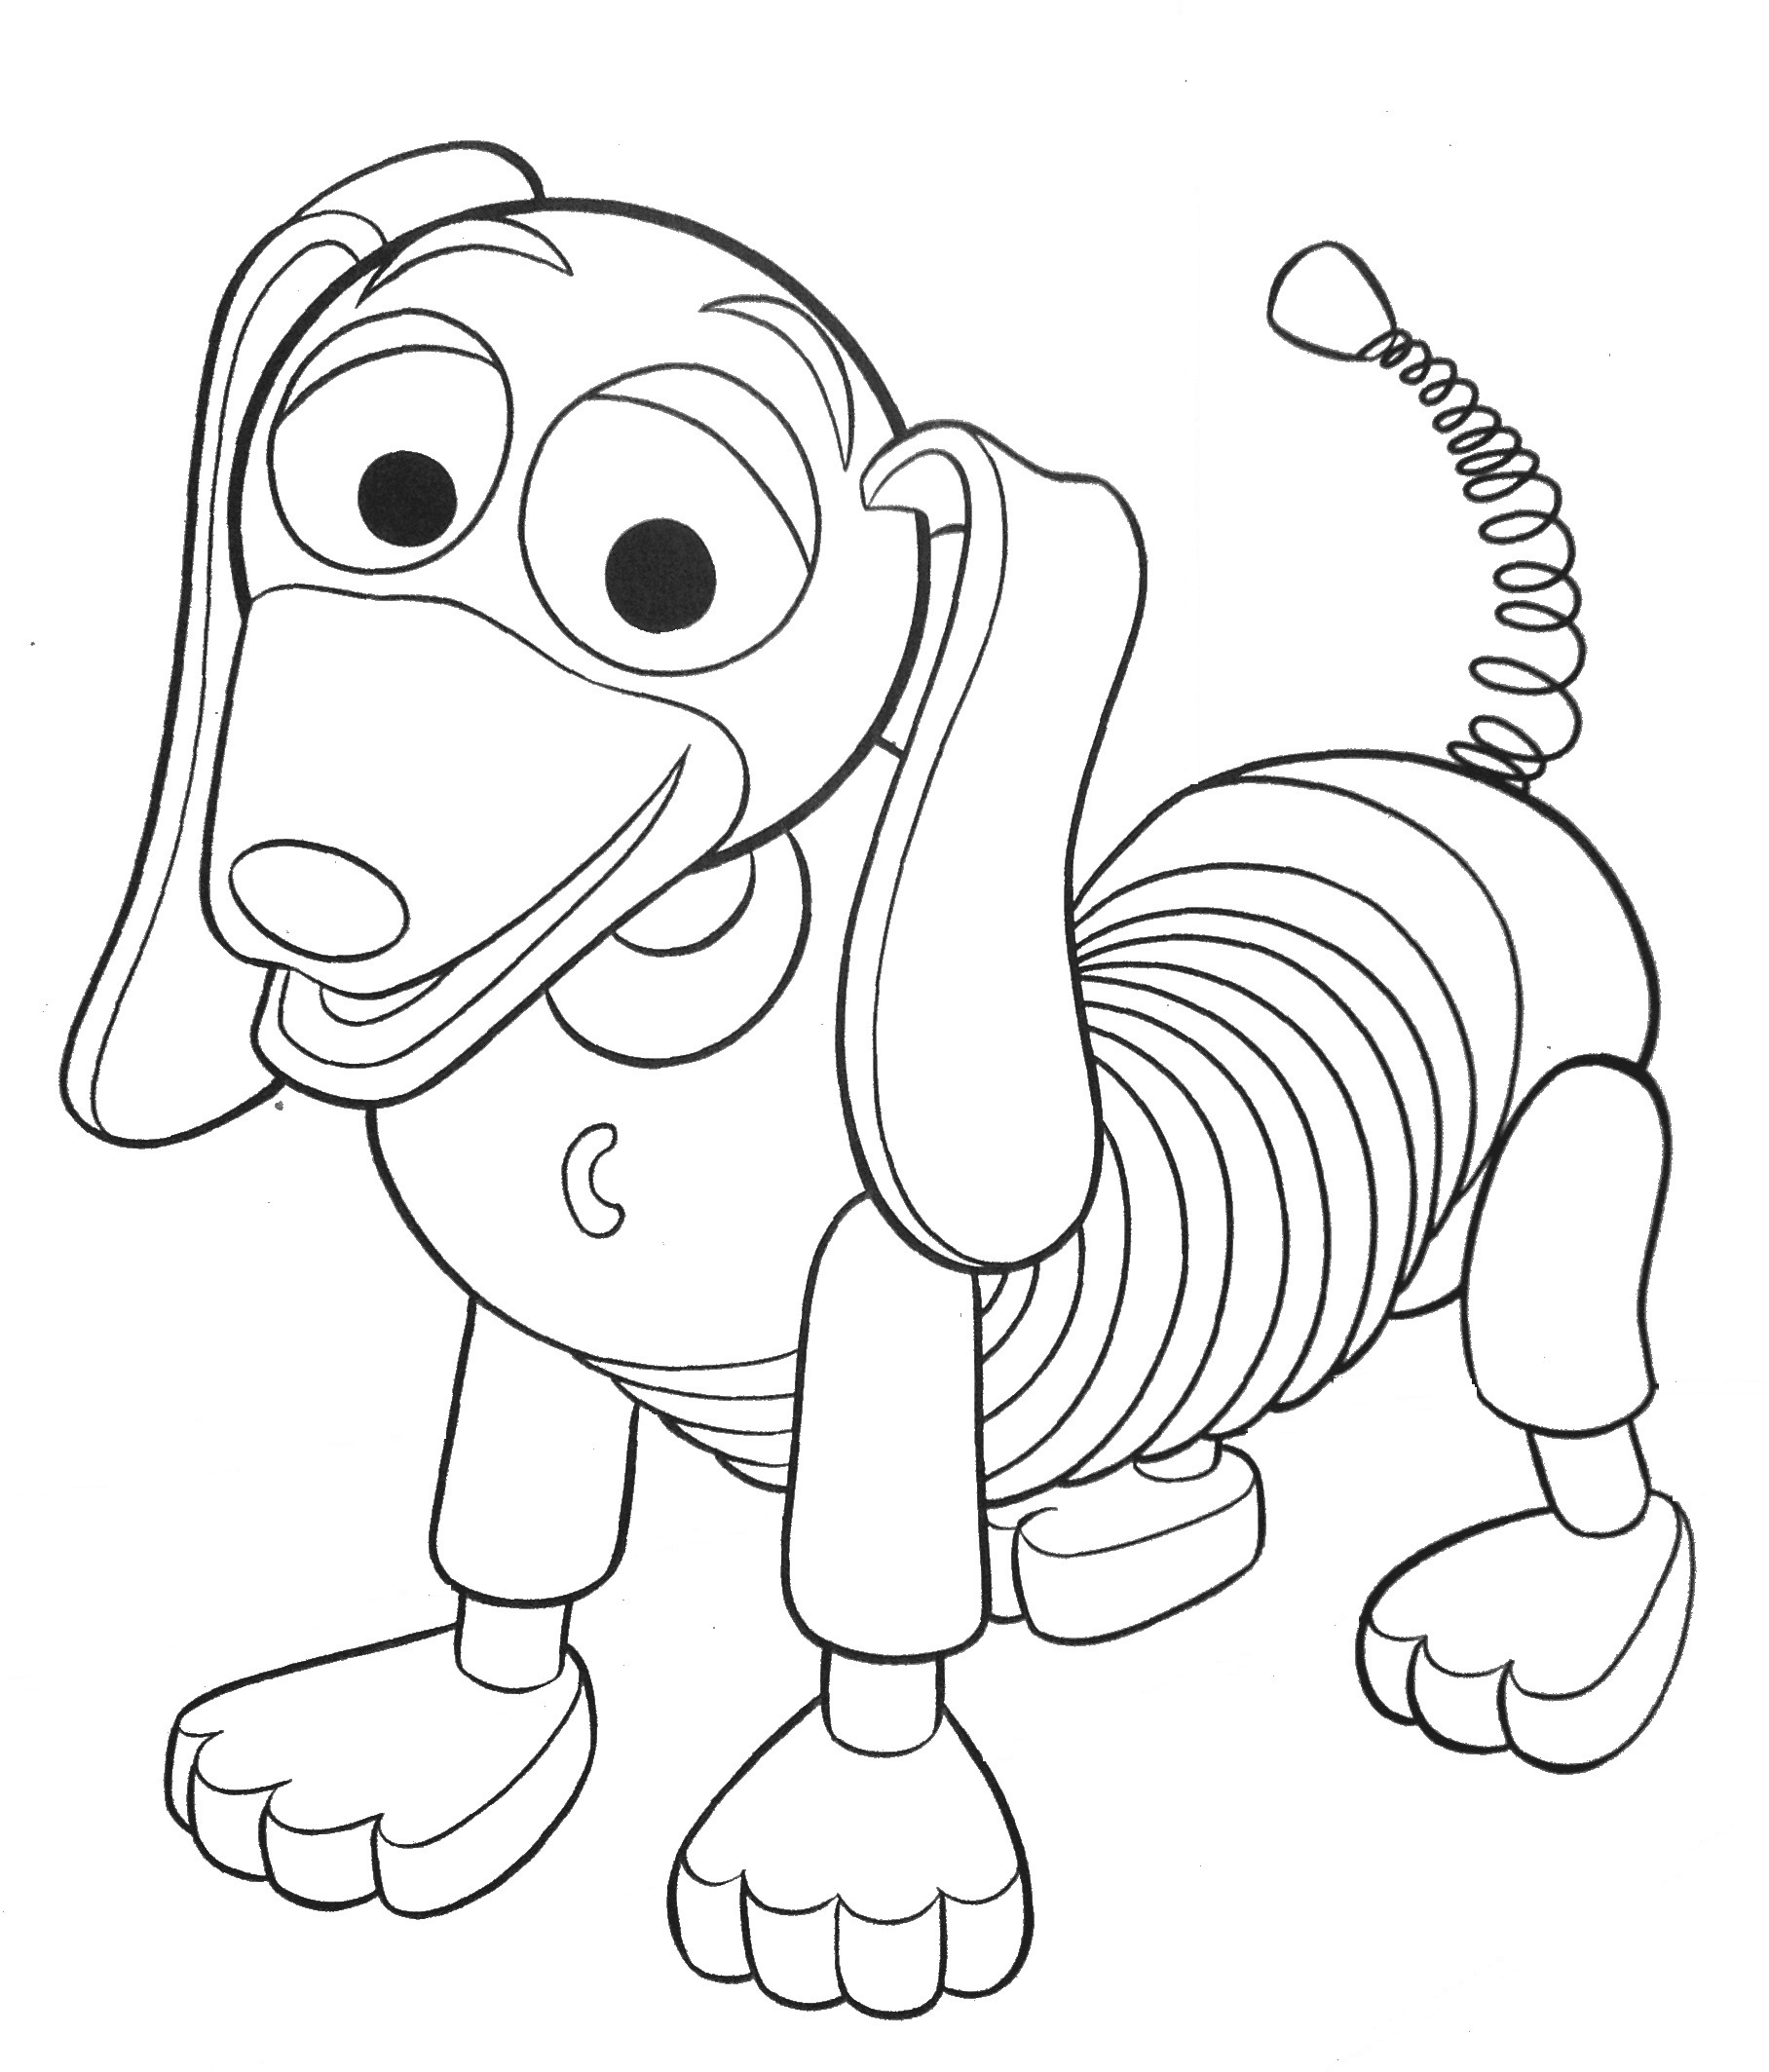 Drawing Toy Story #72544 (Animation Movies) – Printable coloring pages